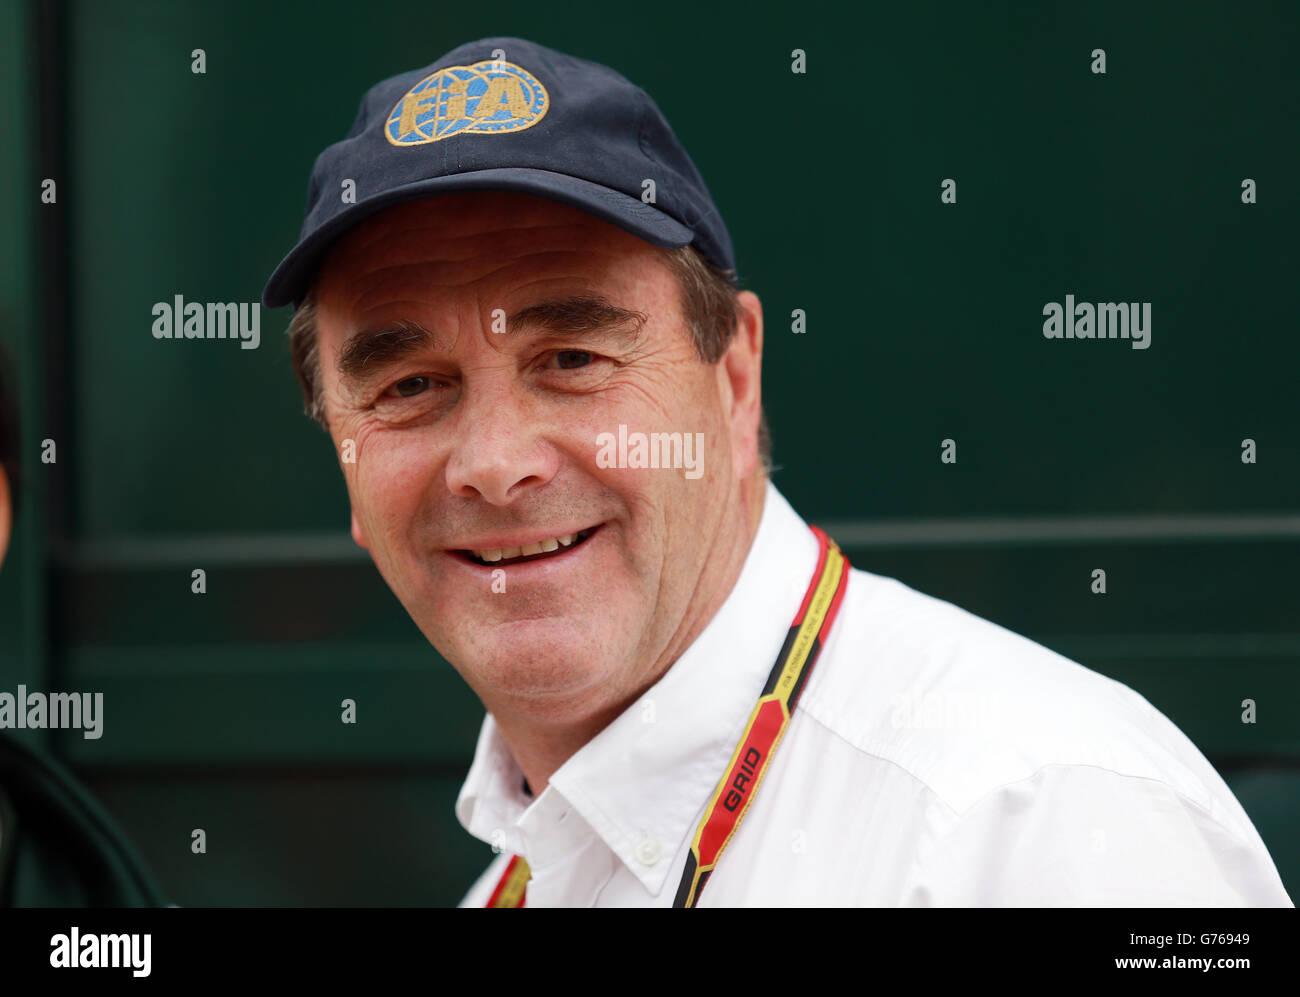 Nigel Mansell during the paddock day at Silverstone Circuit, Towcester. Stock Photo